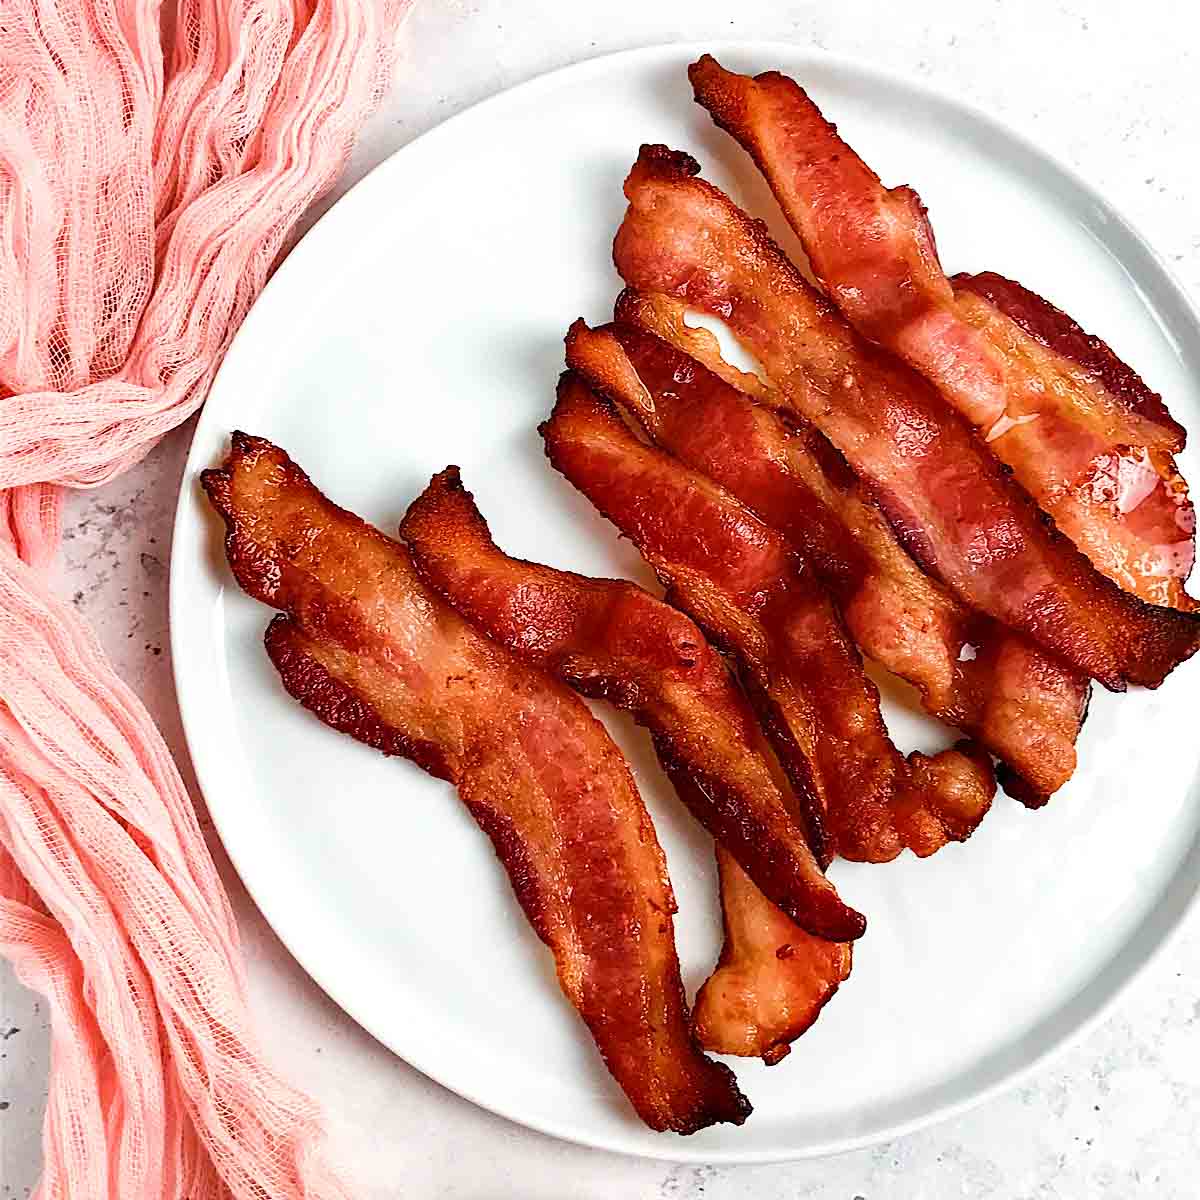 How to Cook Frozen Bacon - Pork or Turkey Bacon in the Oven